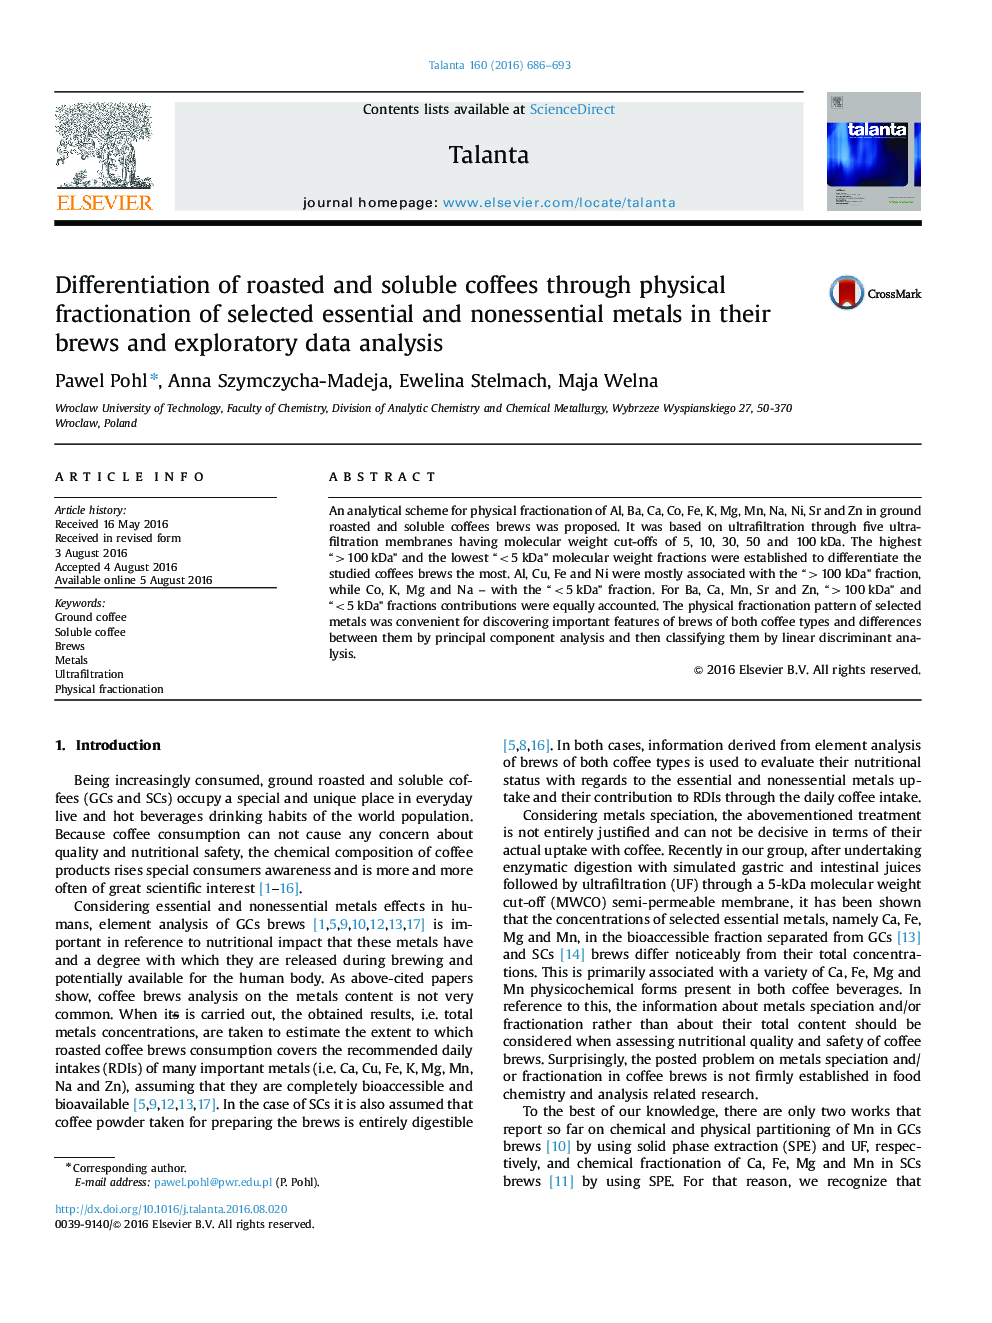 Differentiation of roasted and soluble coffees through physical fractionation of selected essential and nonessential metals in their brews and exploratory data analysis